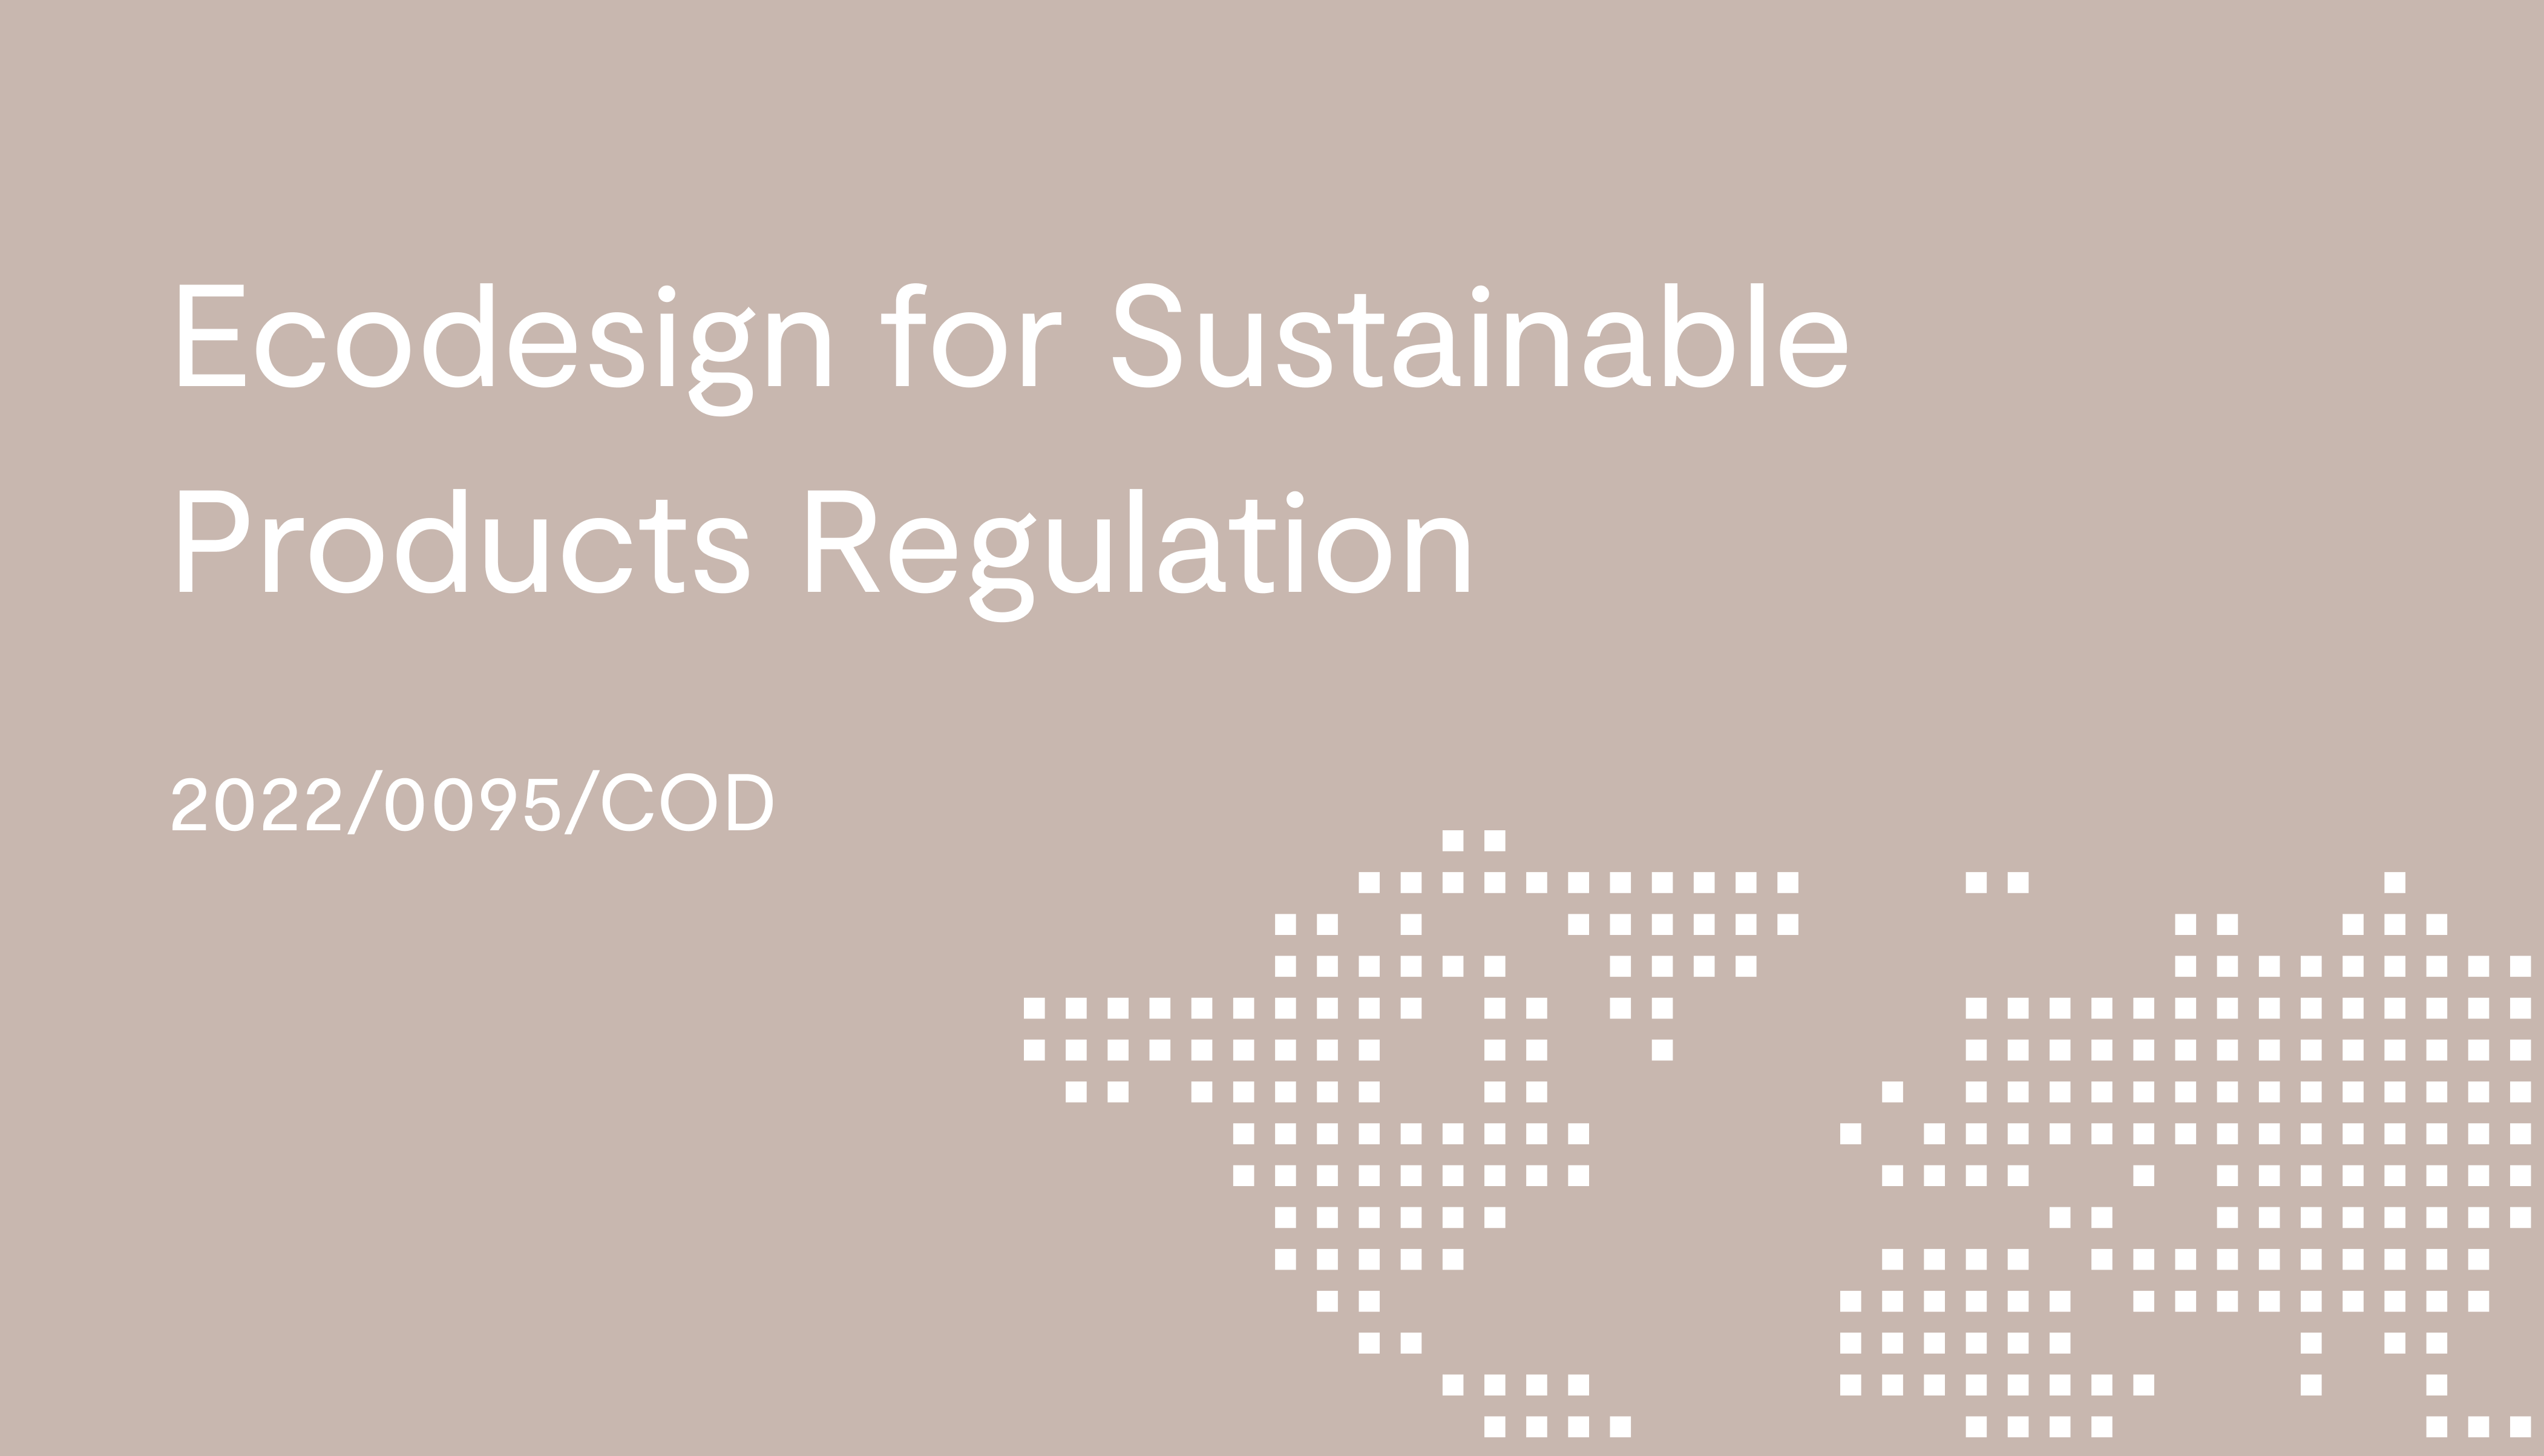 Ecodesign for Sustainable Products Regulation (2022/0095/COD)